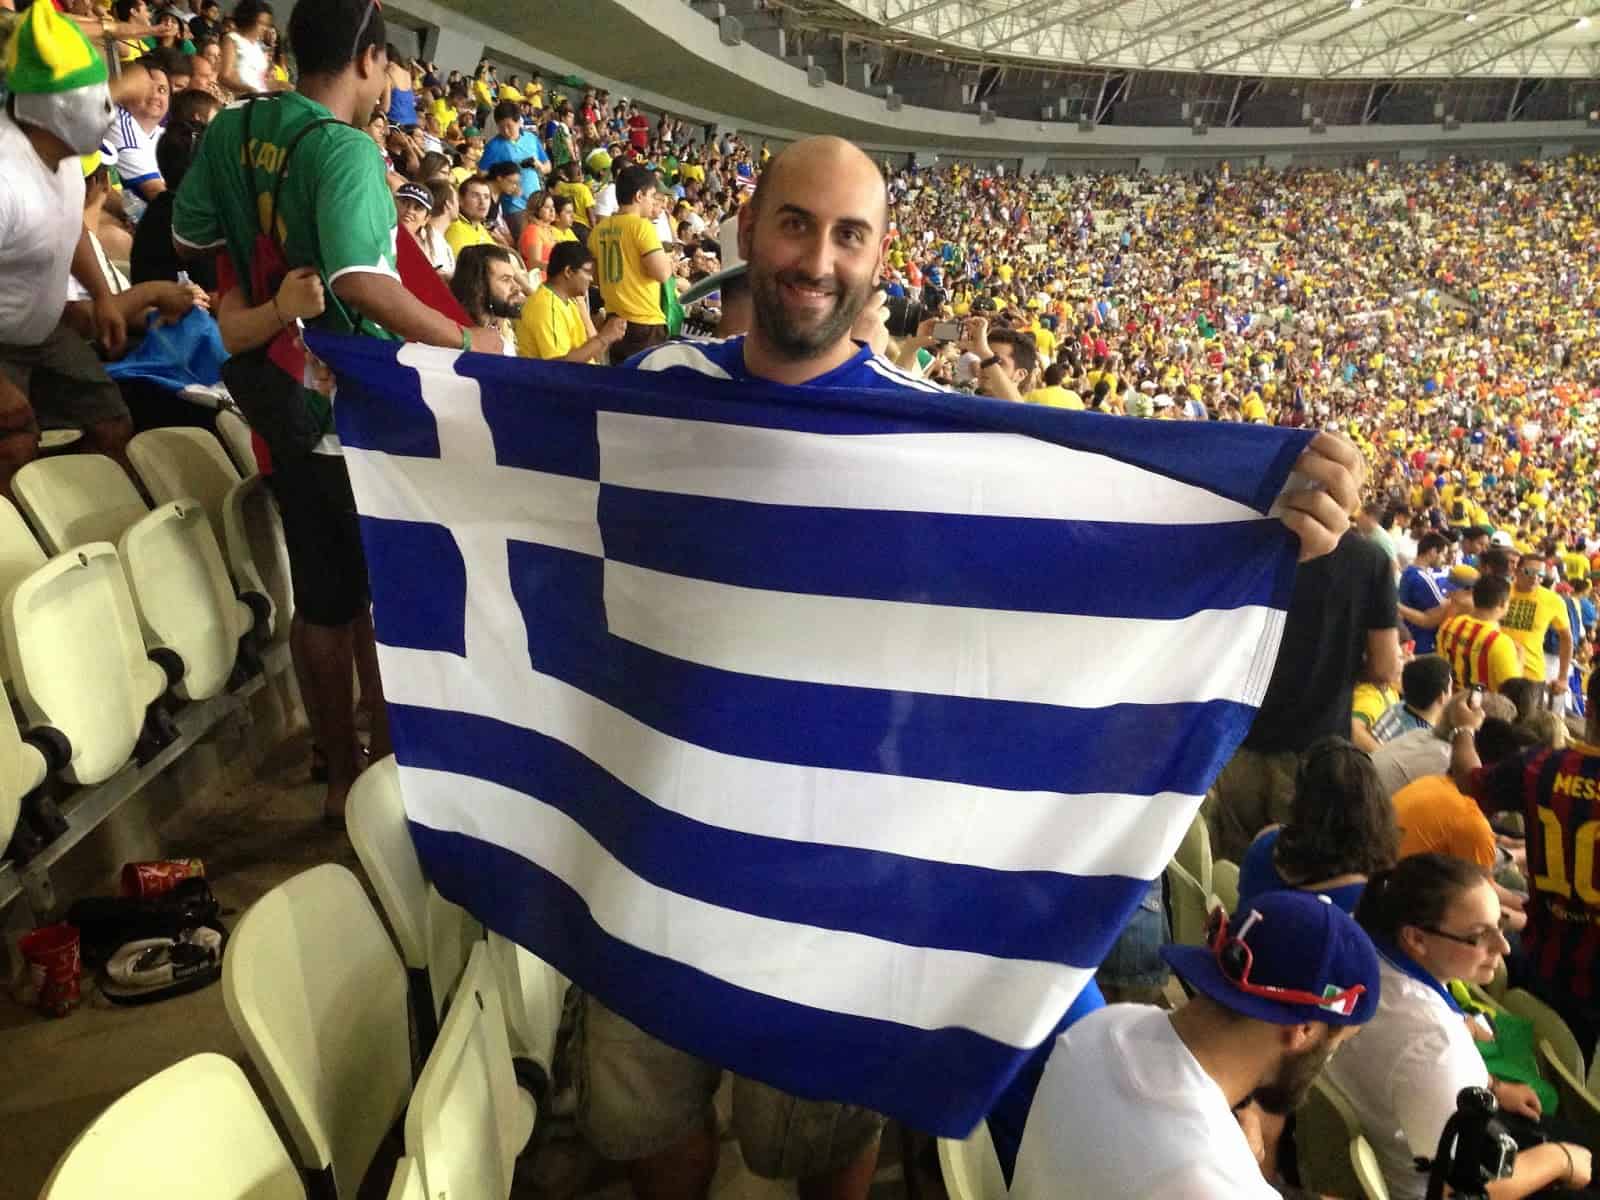 Me at the Greece vs Côte d'Ivoire game in the 2014 World Cup at Arena Castelão in Fortaleza, Brazil